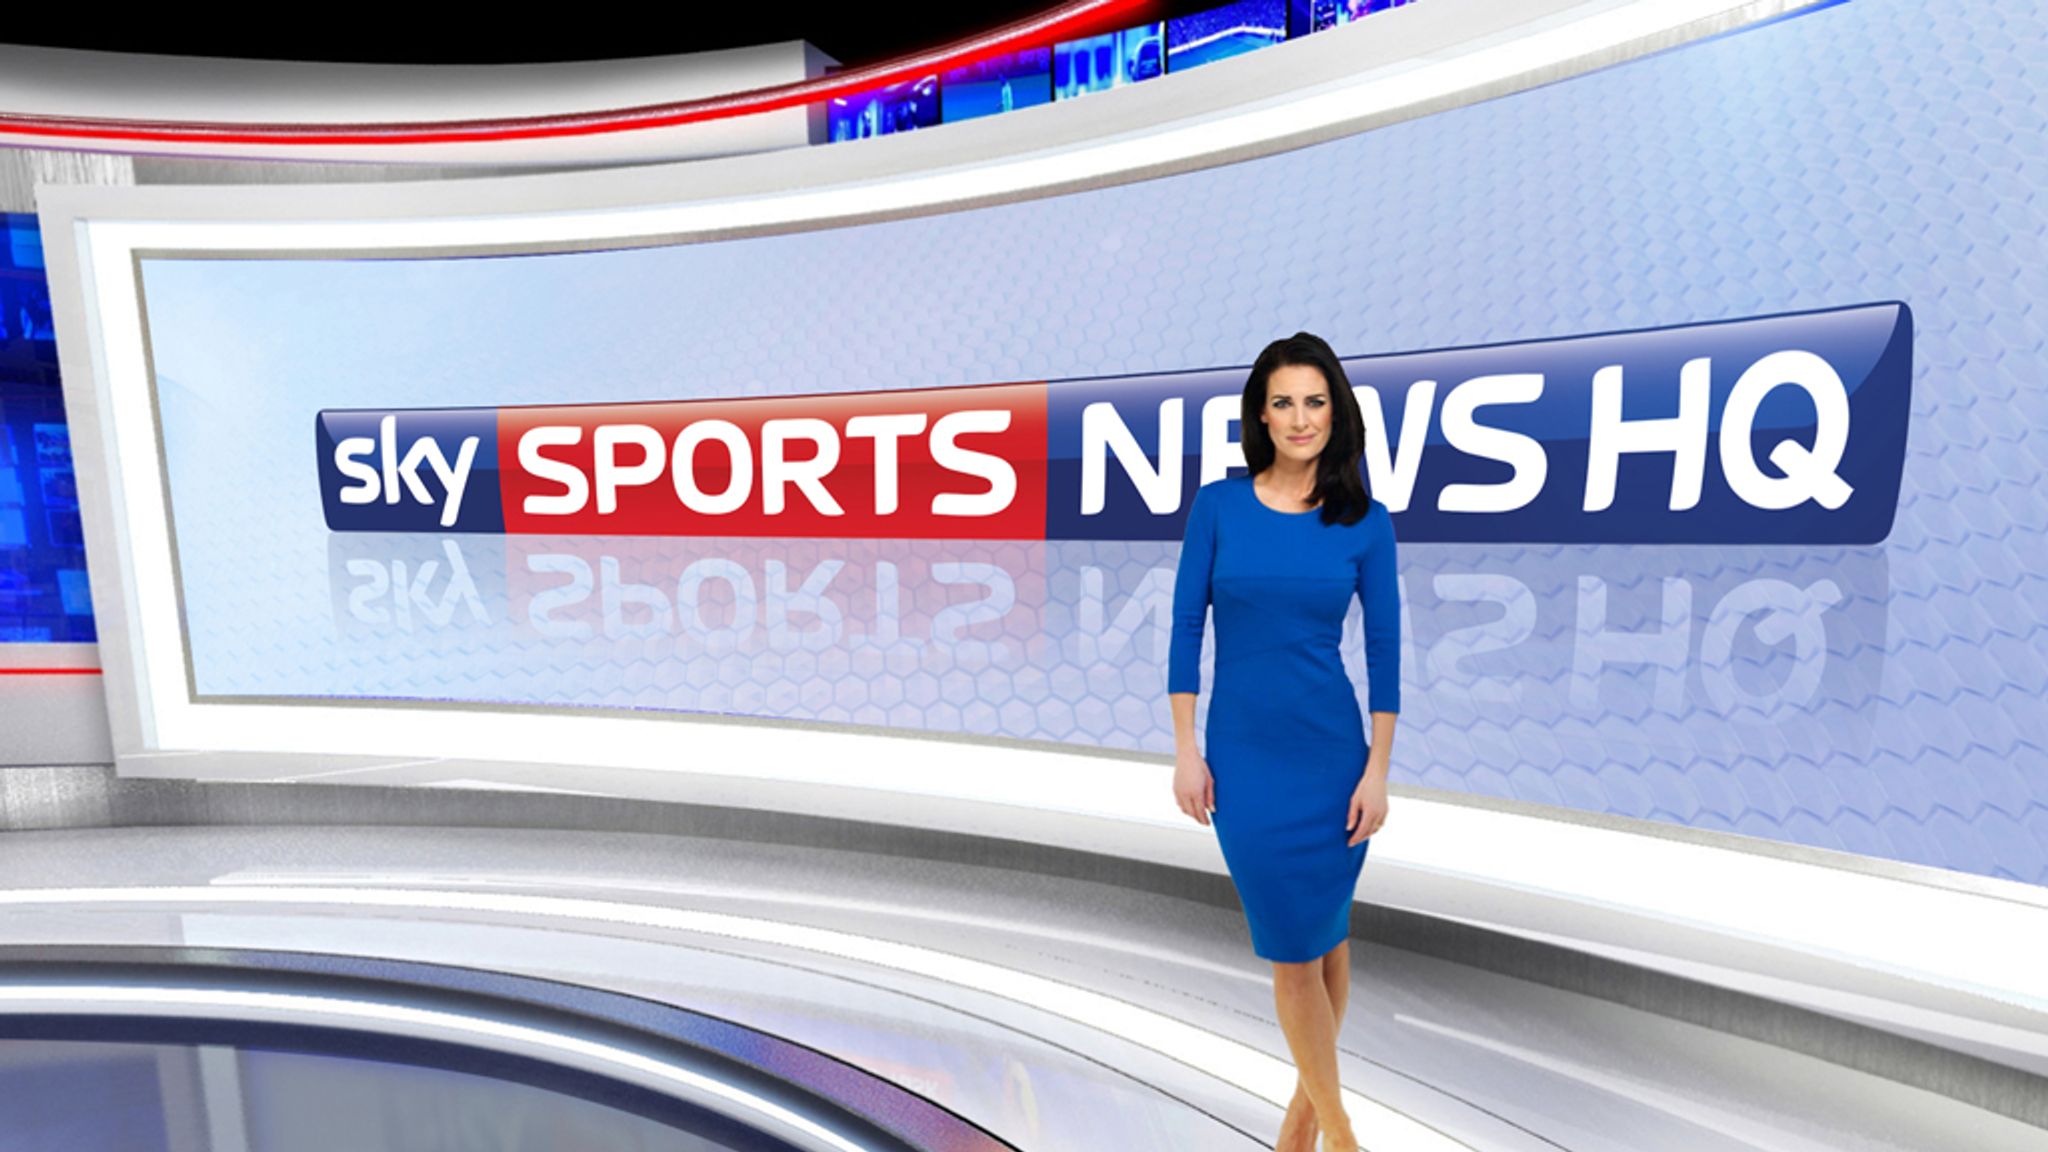 Sky Sports News Hq Will Launch On August 12 On The New Channel Of 401 News News Sky Sports